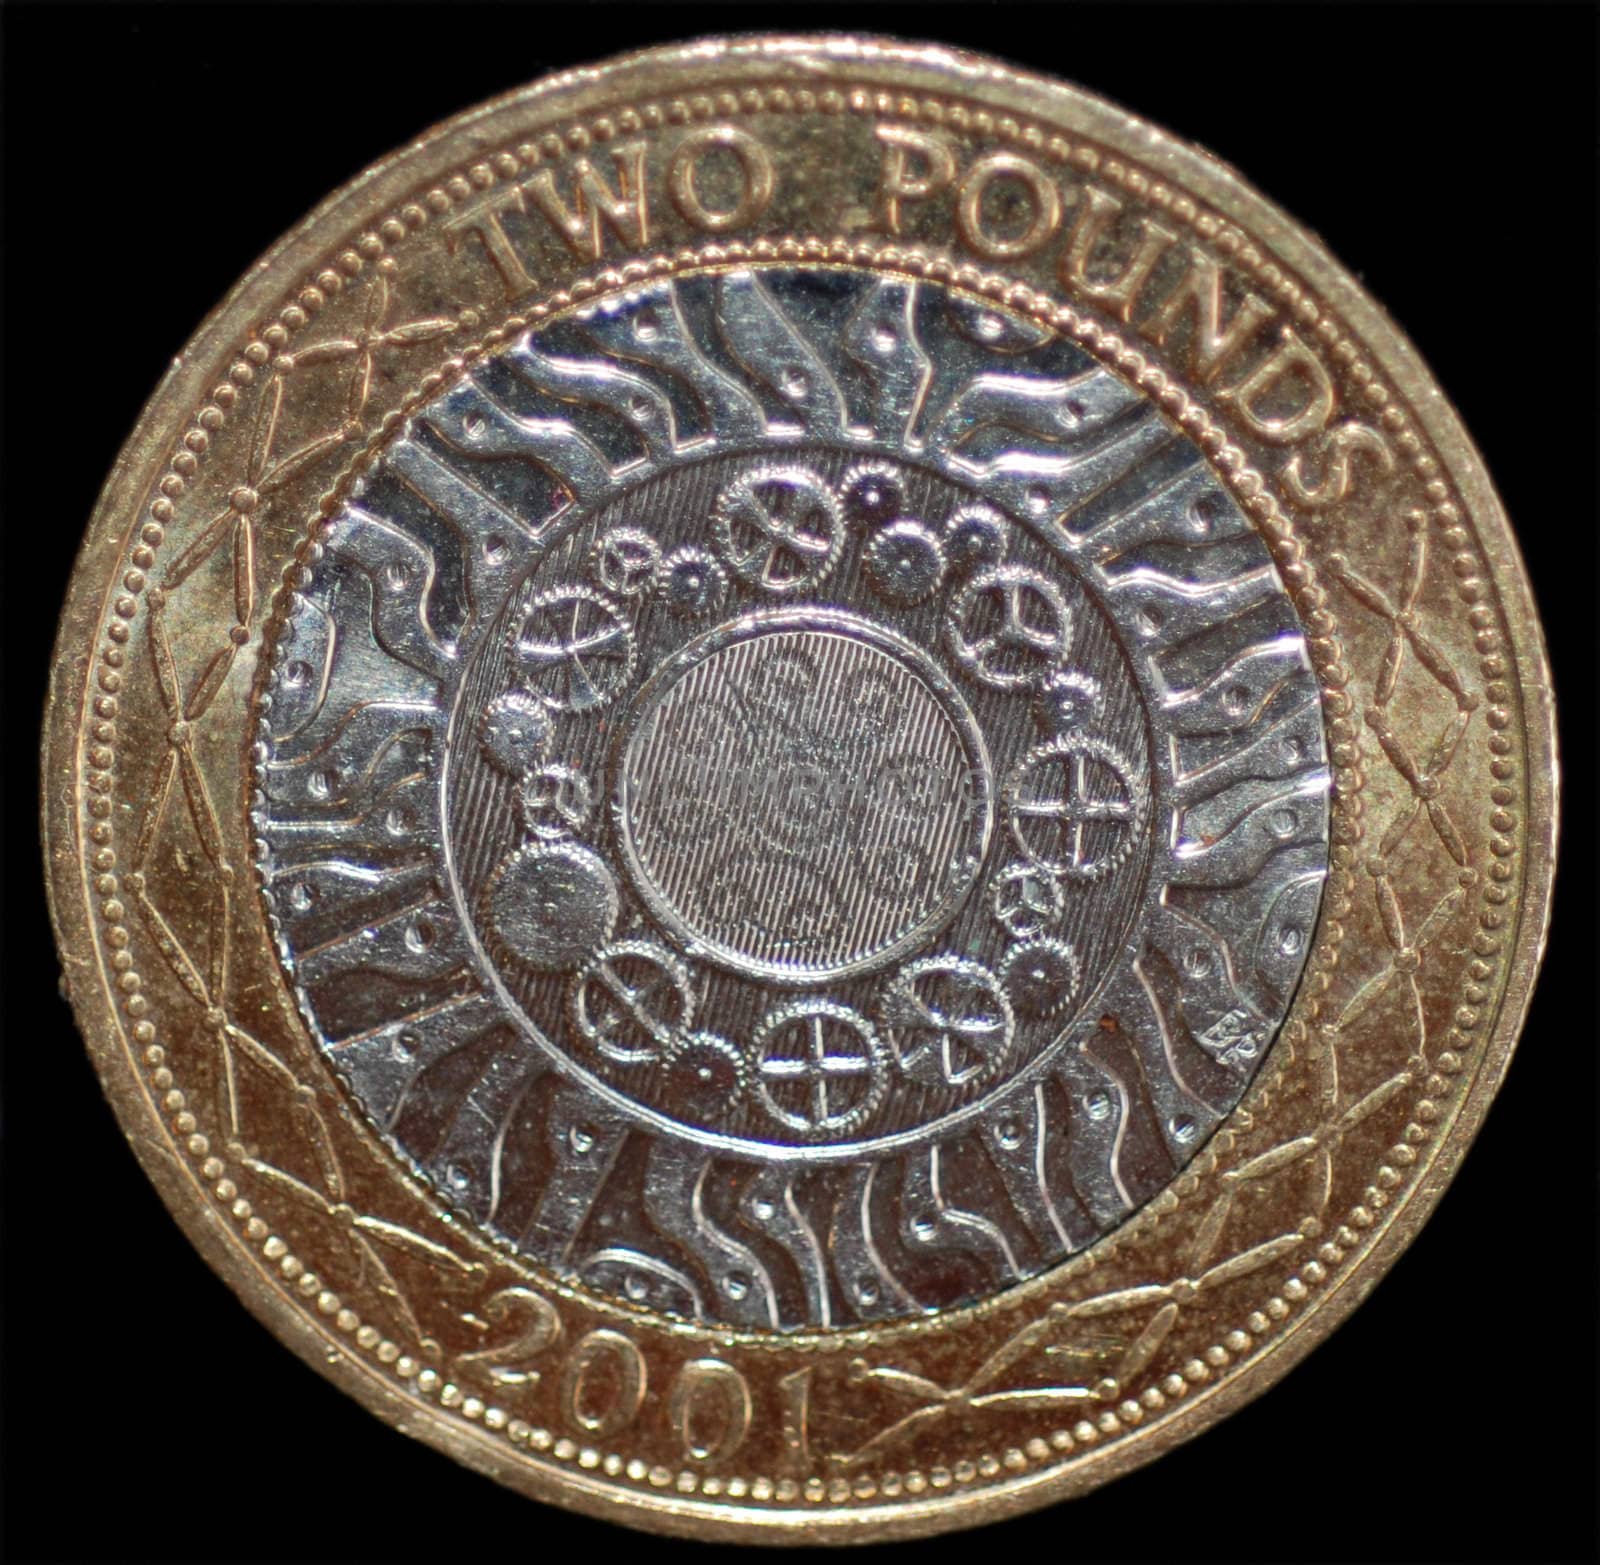 A close-up of a UK £2 coin.